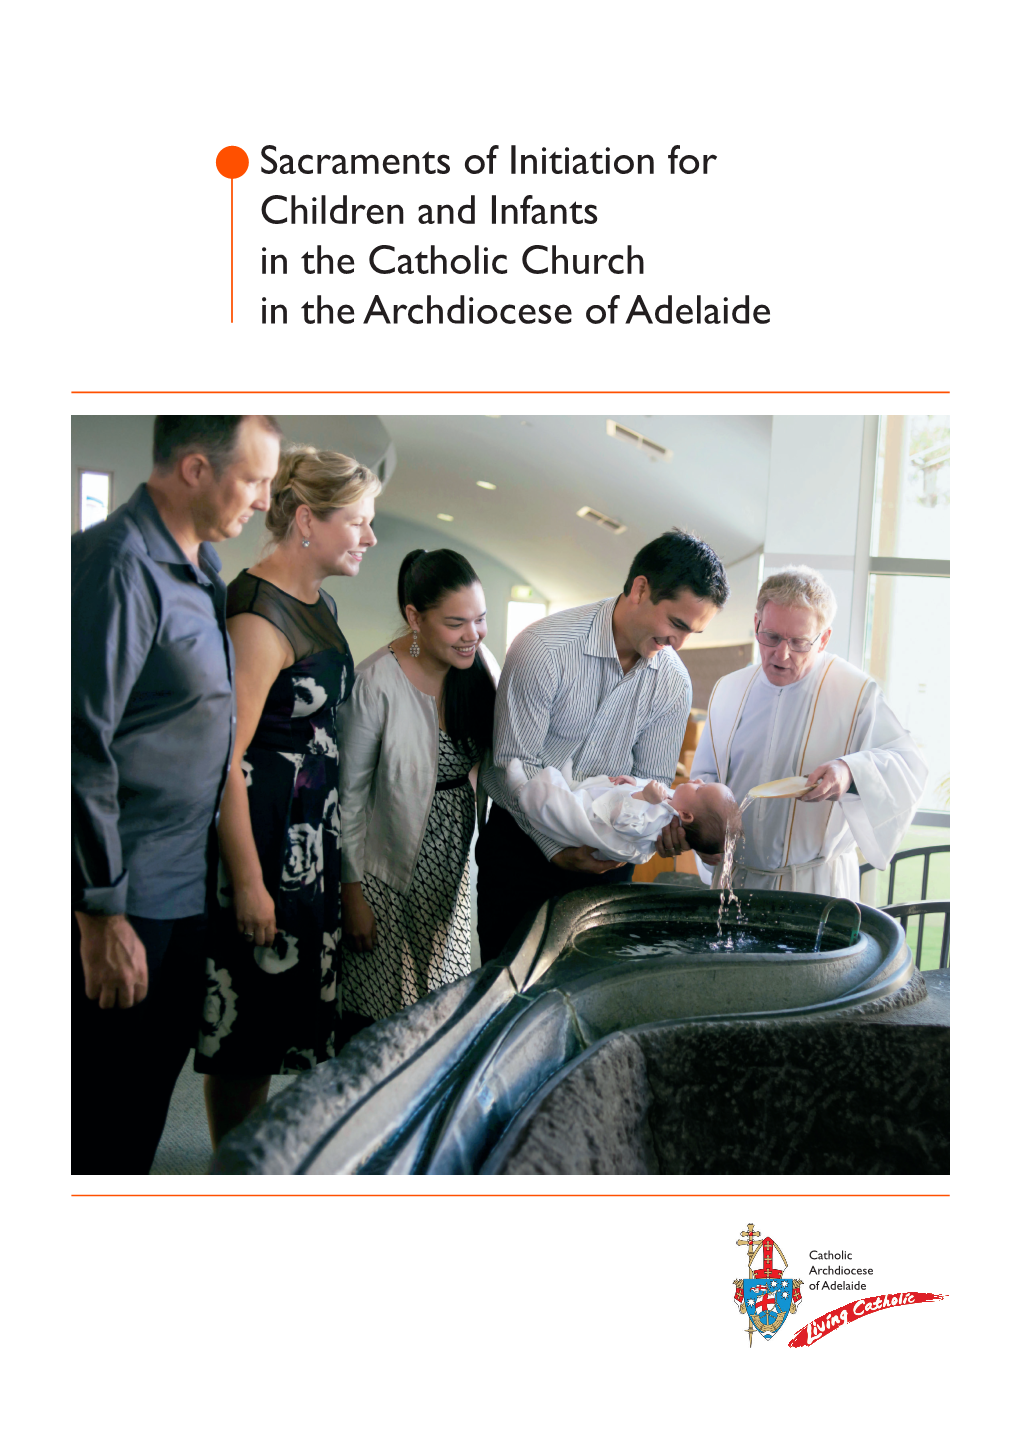 Sacraments of Initiation for Children and Infants in the Catholic Church in the Archdiocese of Adelaide